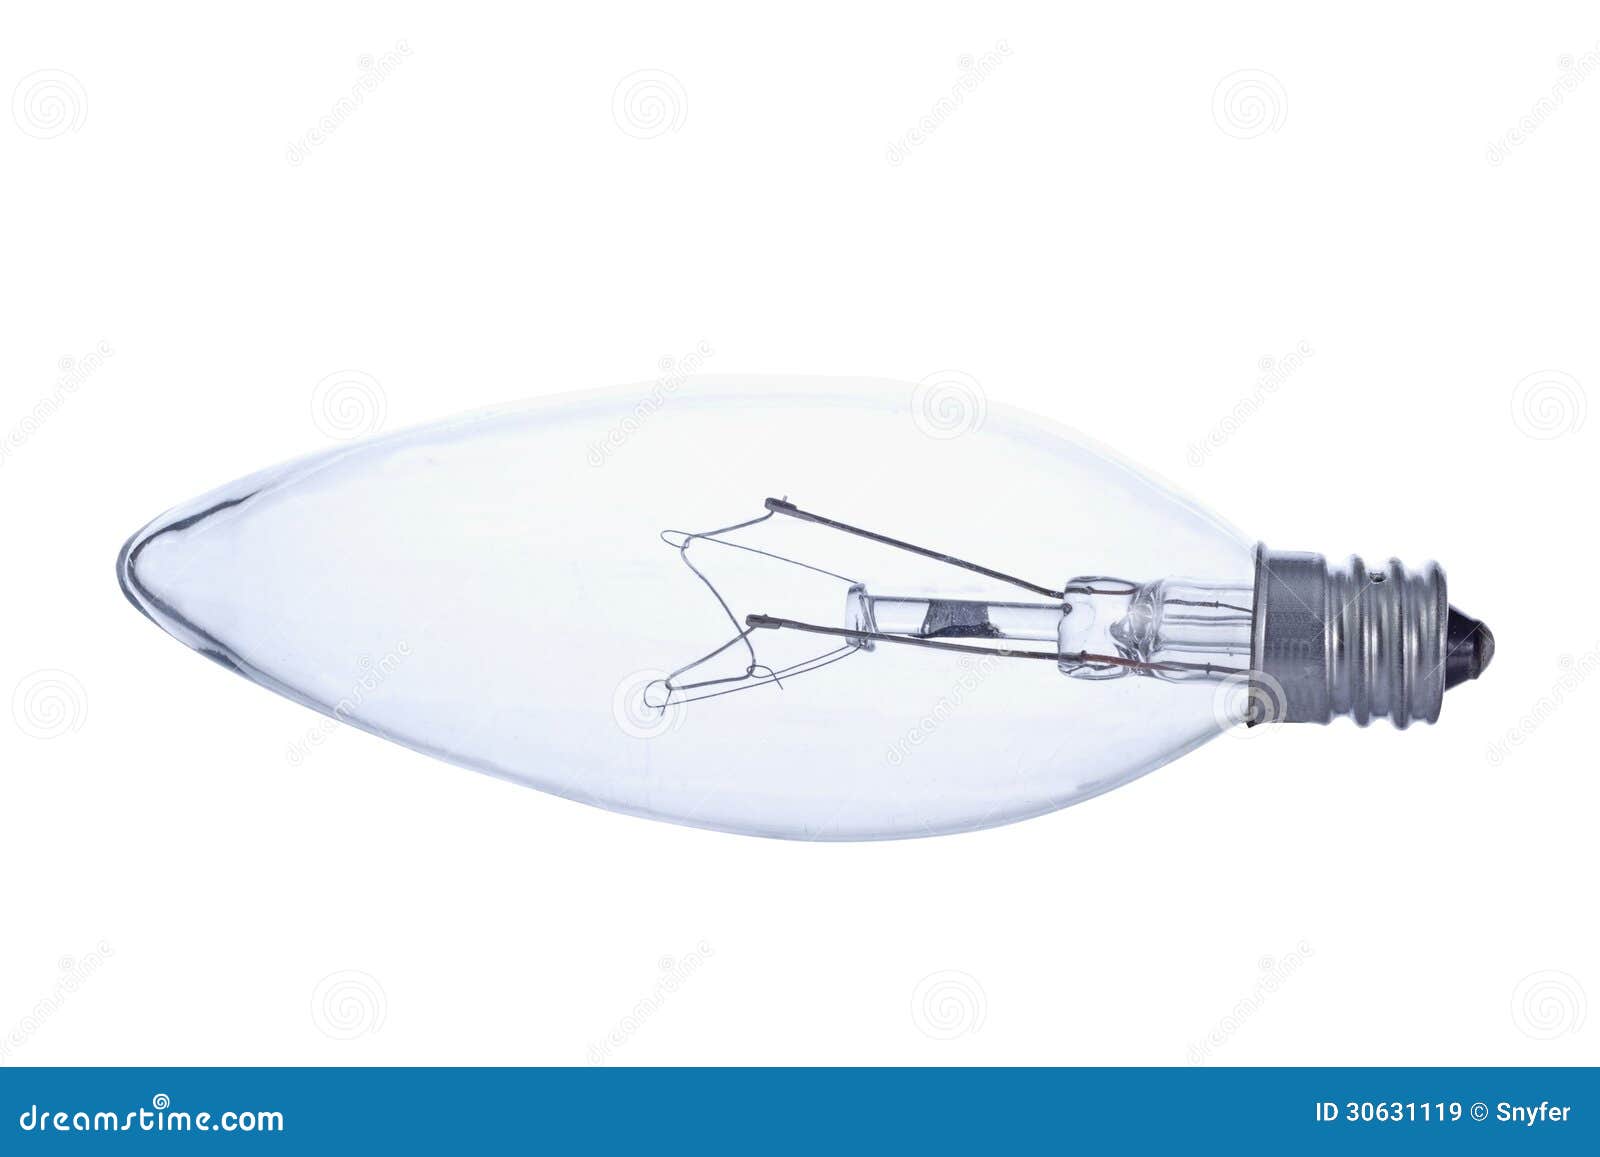  Side  View  Of Clear Tungsten Light  Bulb  Stock Image 